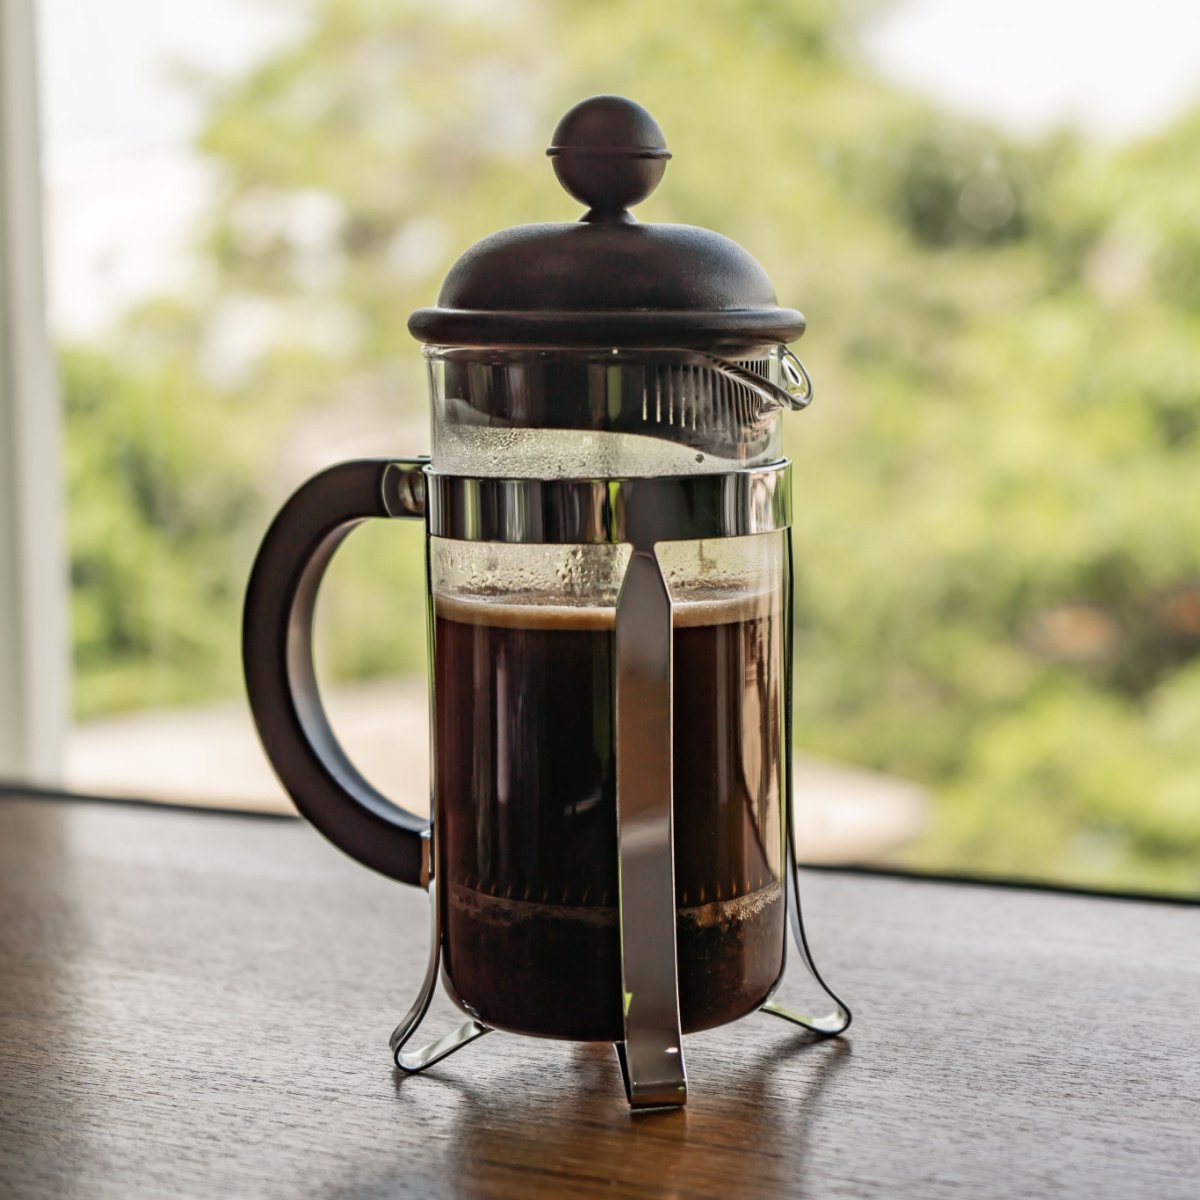 french press containing coffee on windowsill trees outside window in background